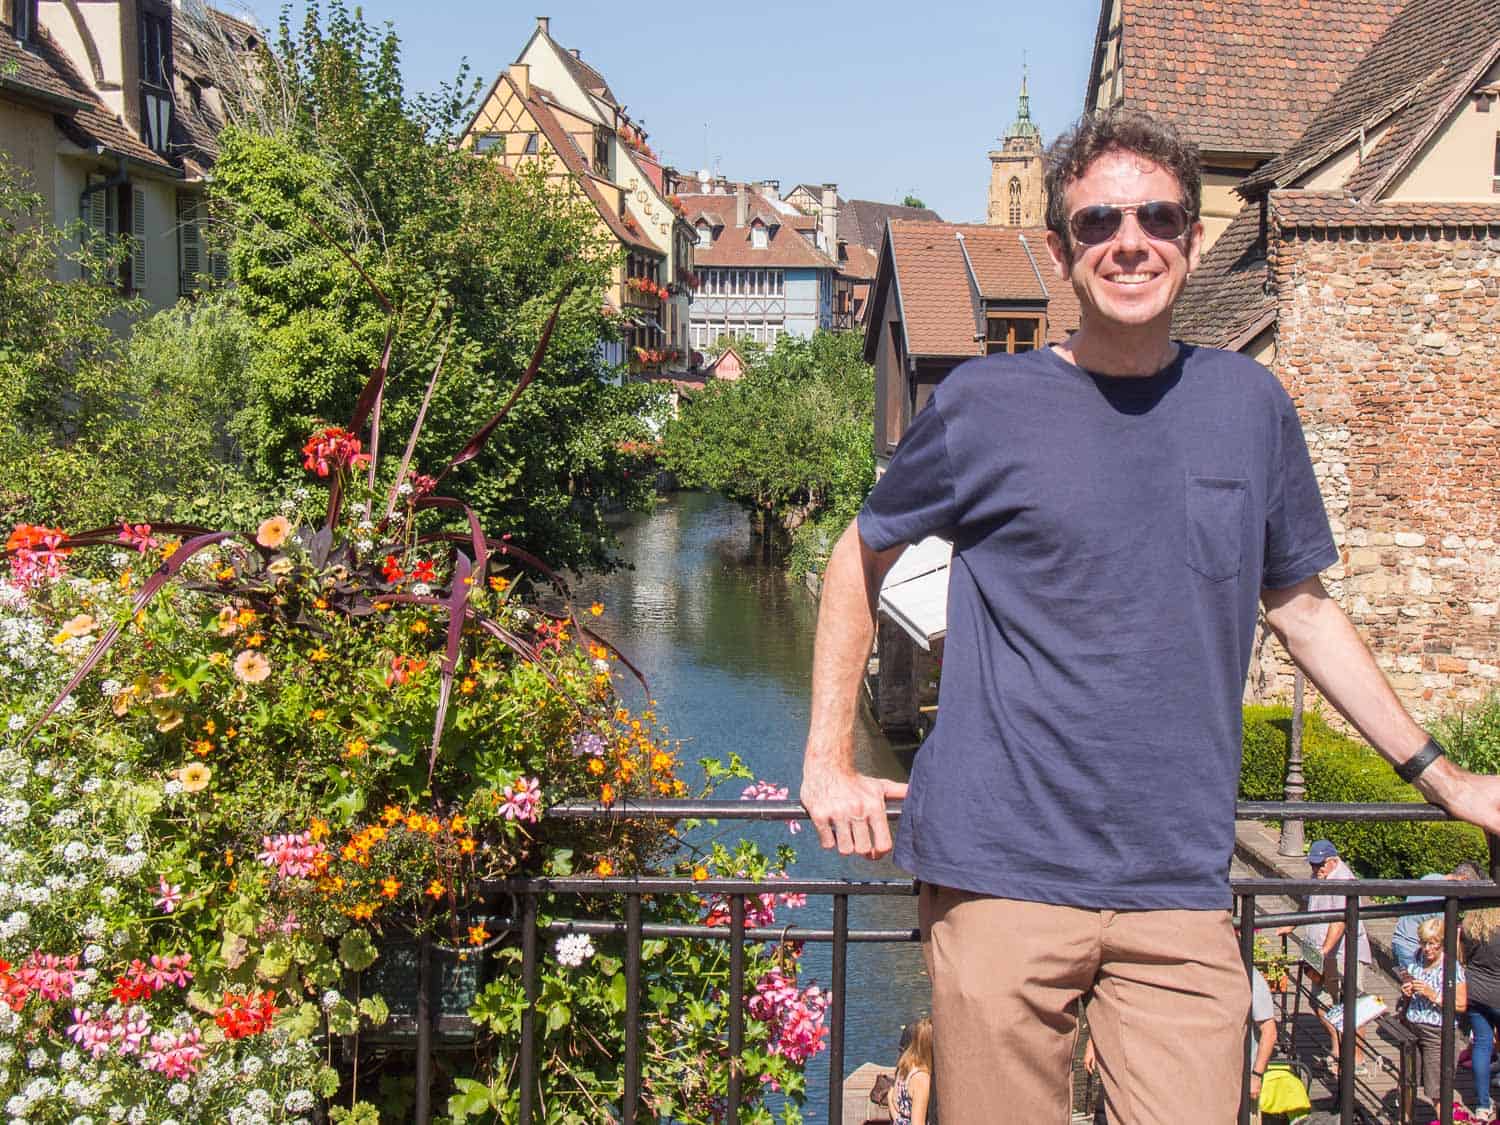 Ably t-shirt review: Simon in Colmar